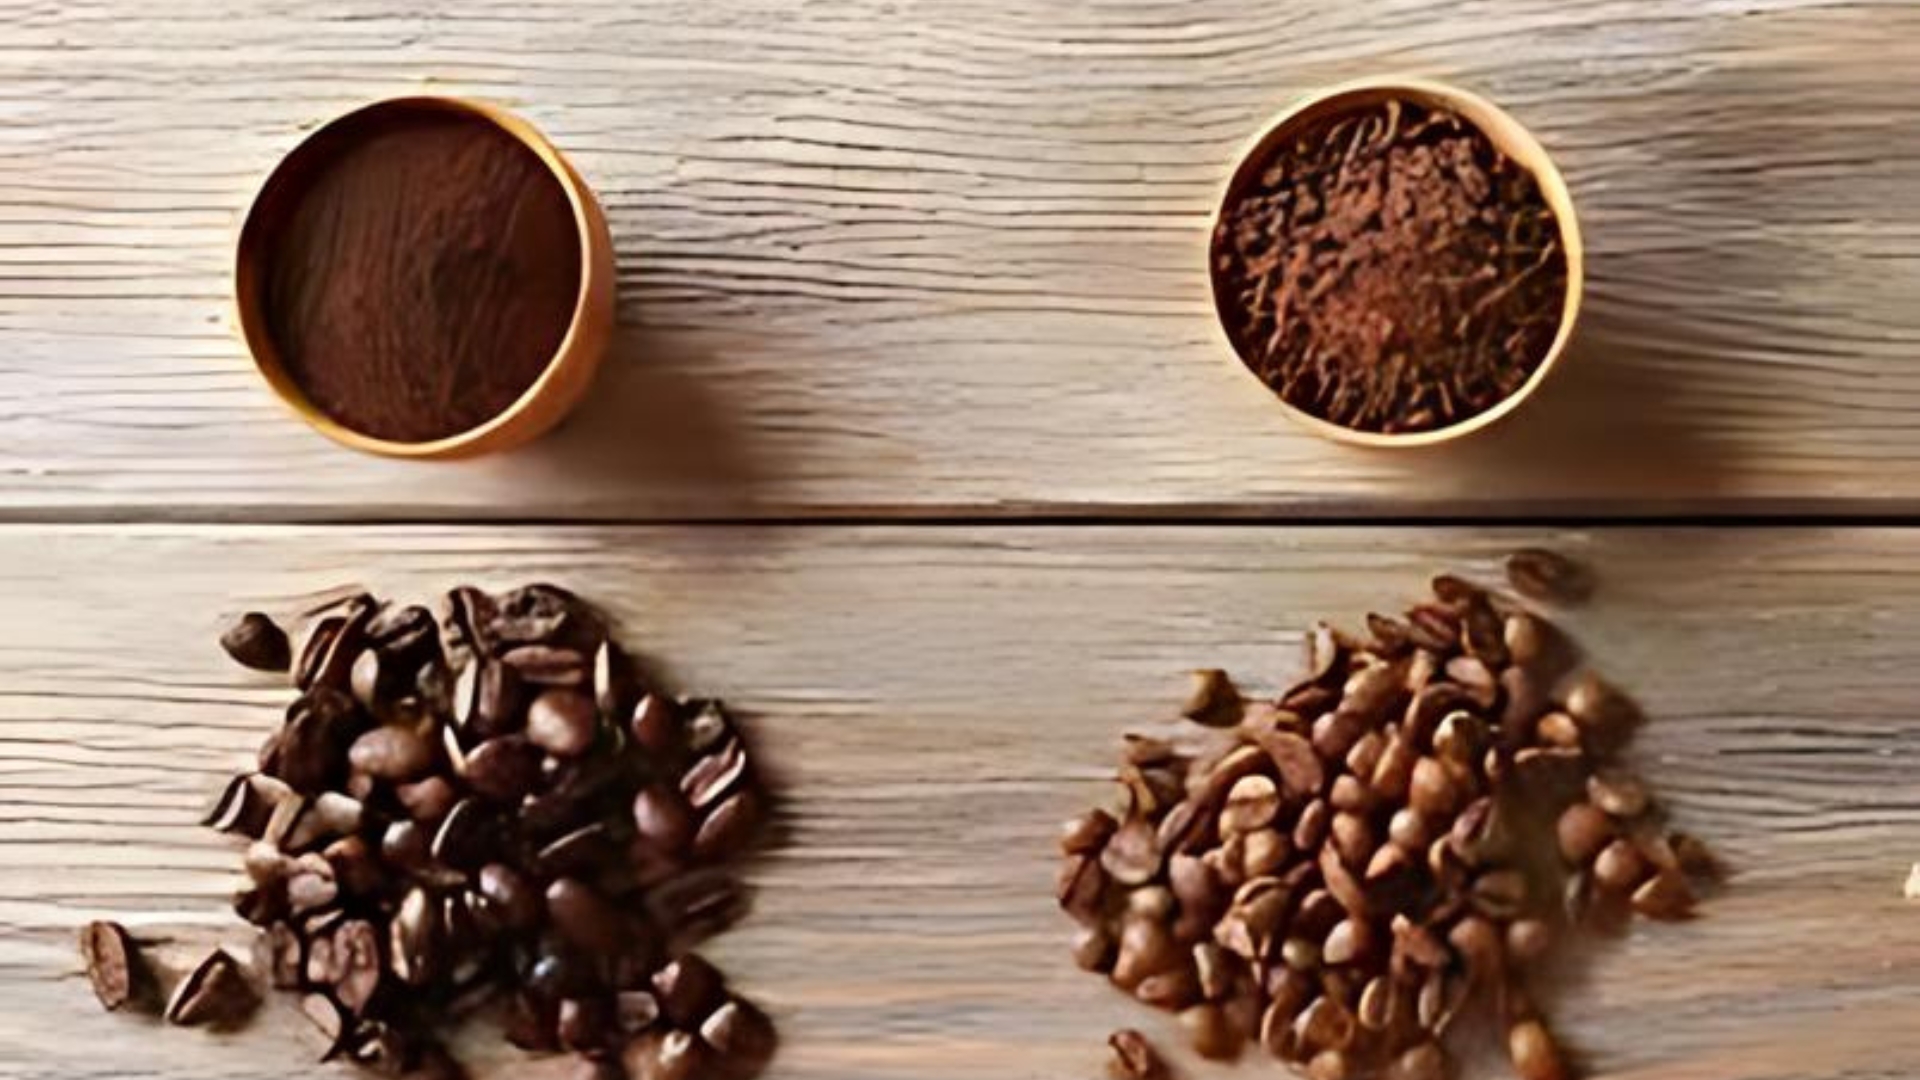 Espresso Beans vs Coffee Beans – Is There A Difference?